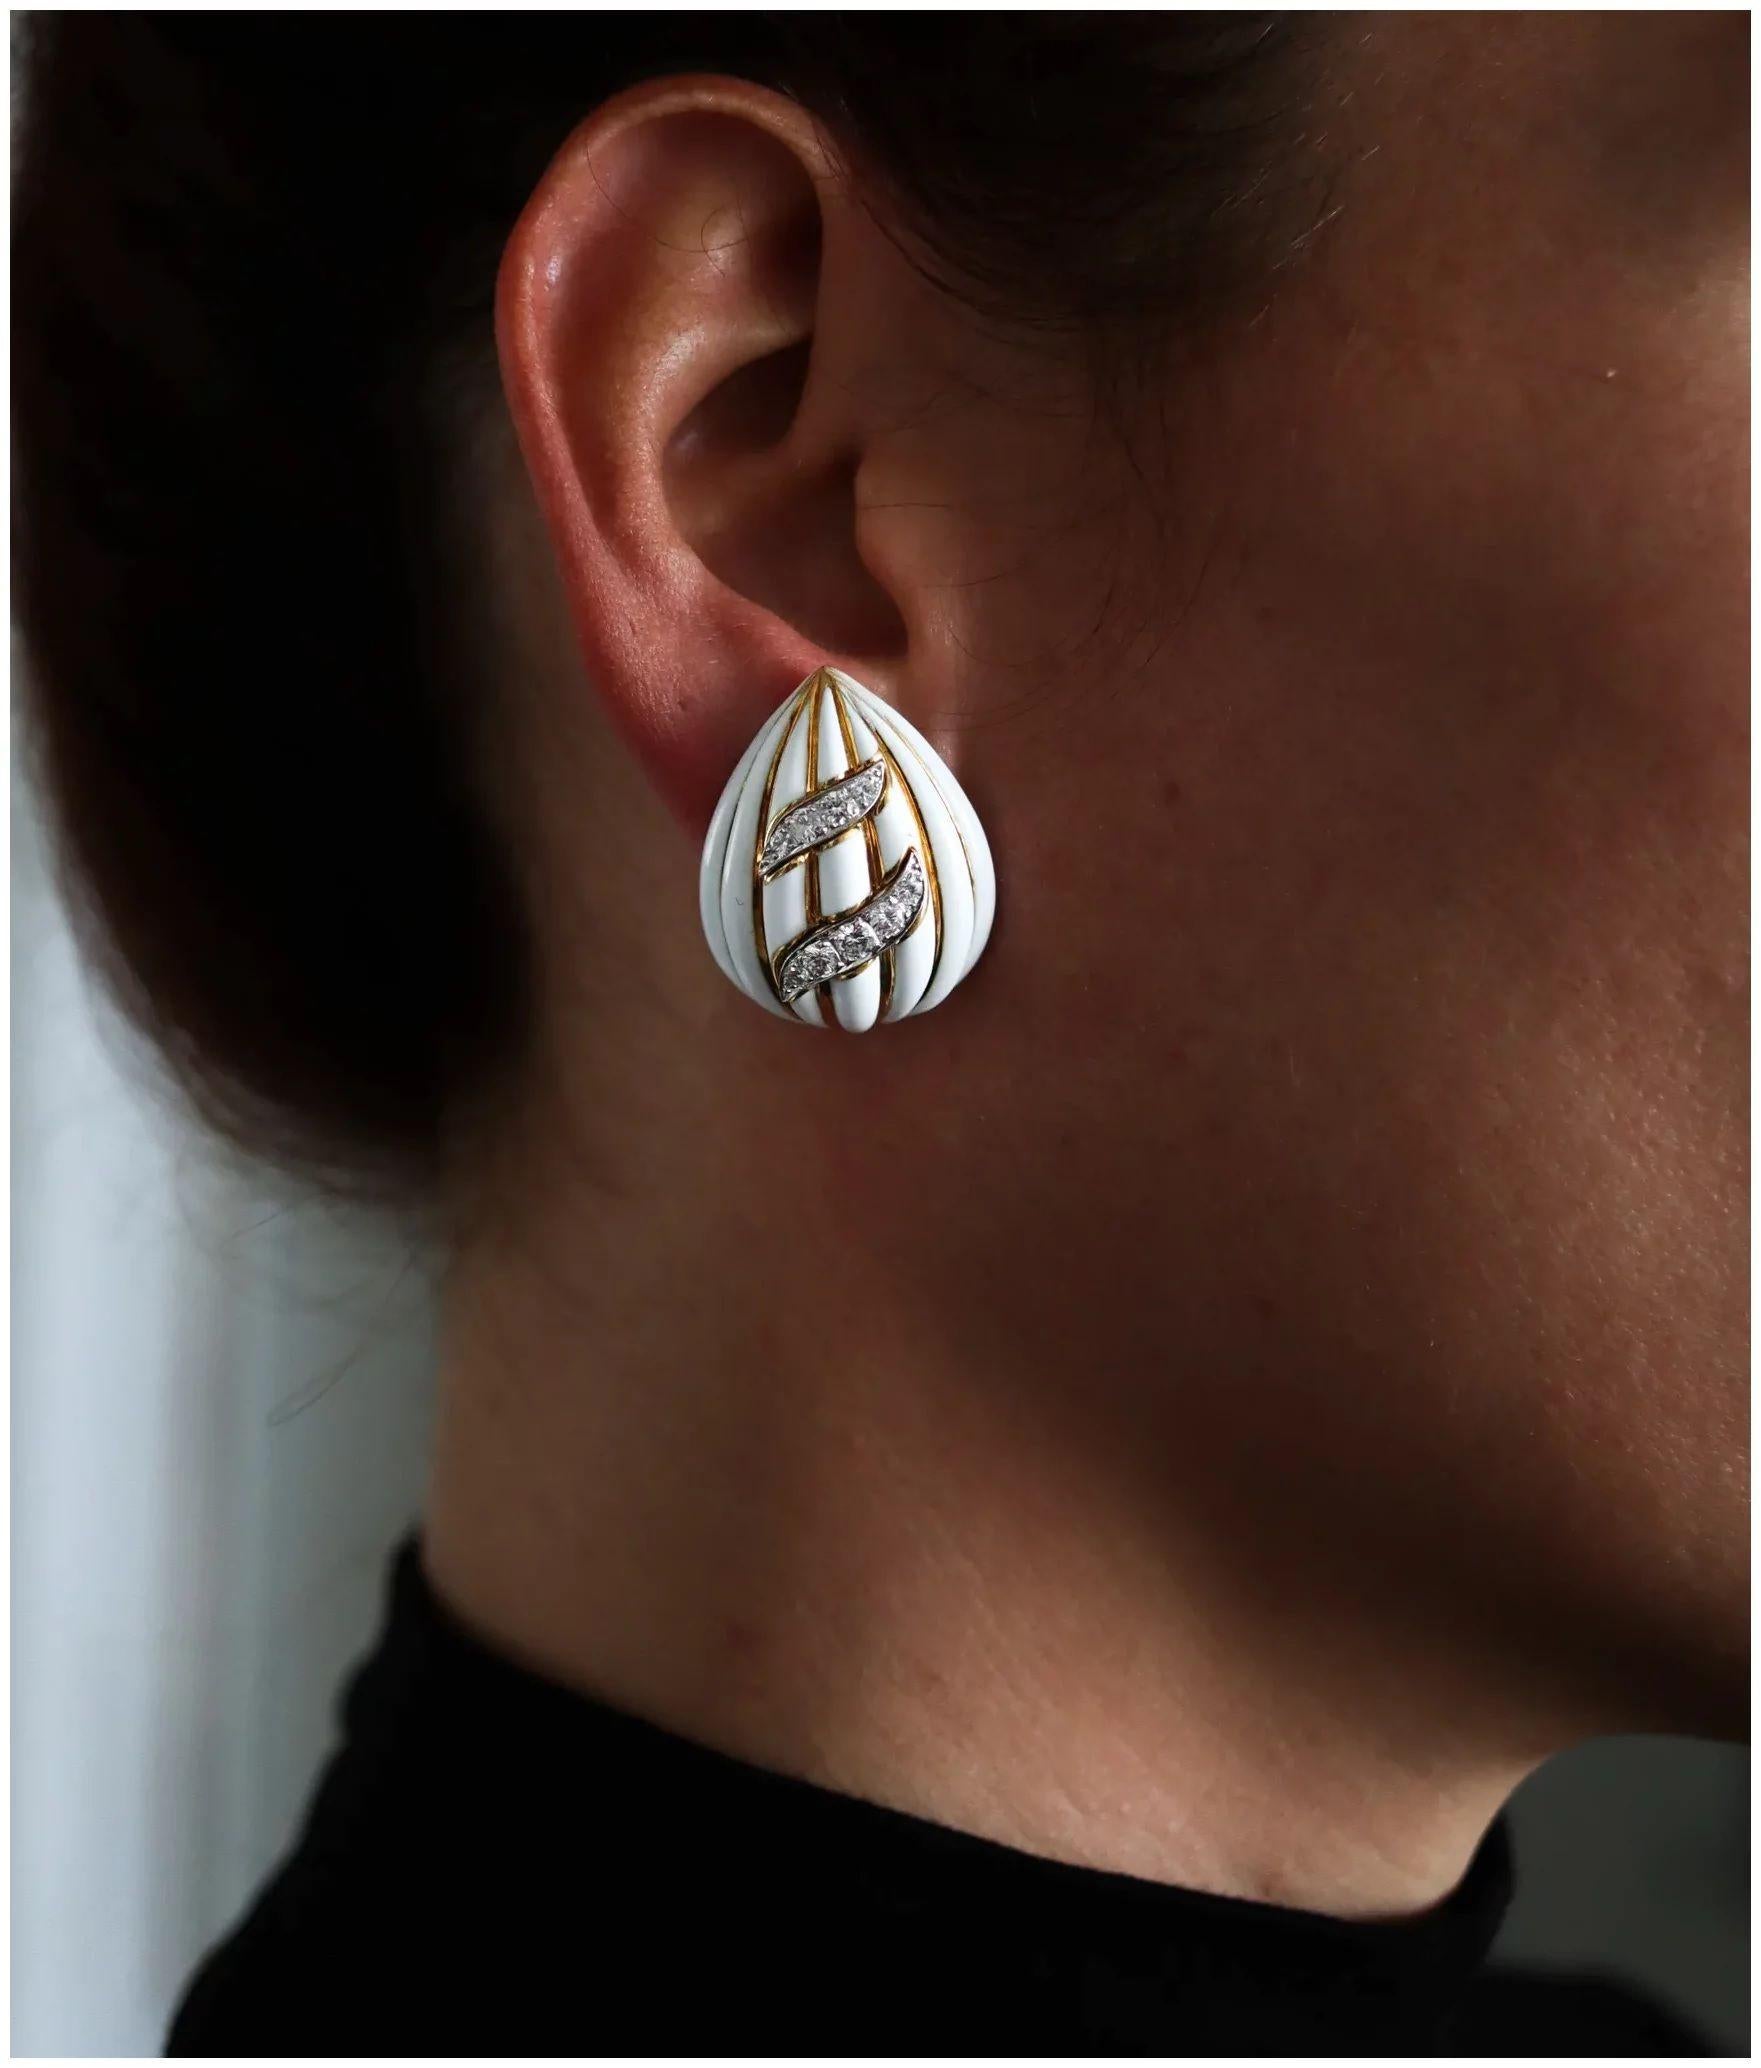 Fluted almonds earrings designed by David Webb (1925-1975).
Beautiful American classic pair, created in New York City at the jewelry atelier of David Webb during the modernist period, back in the 1970's. These clips-earrings has been carefully